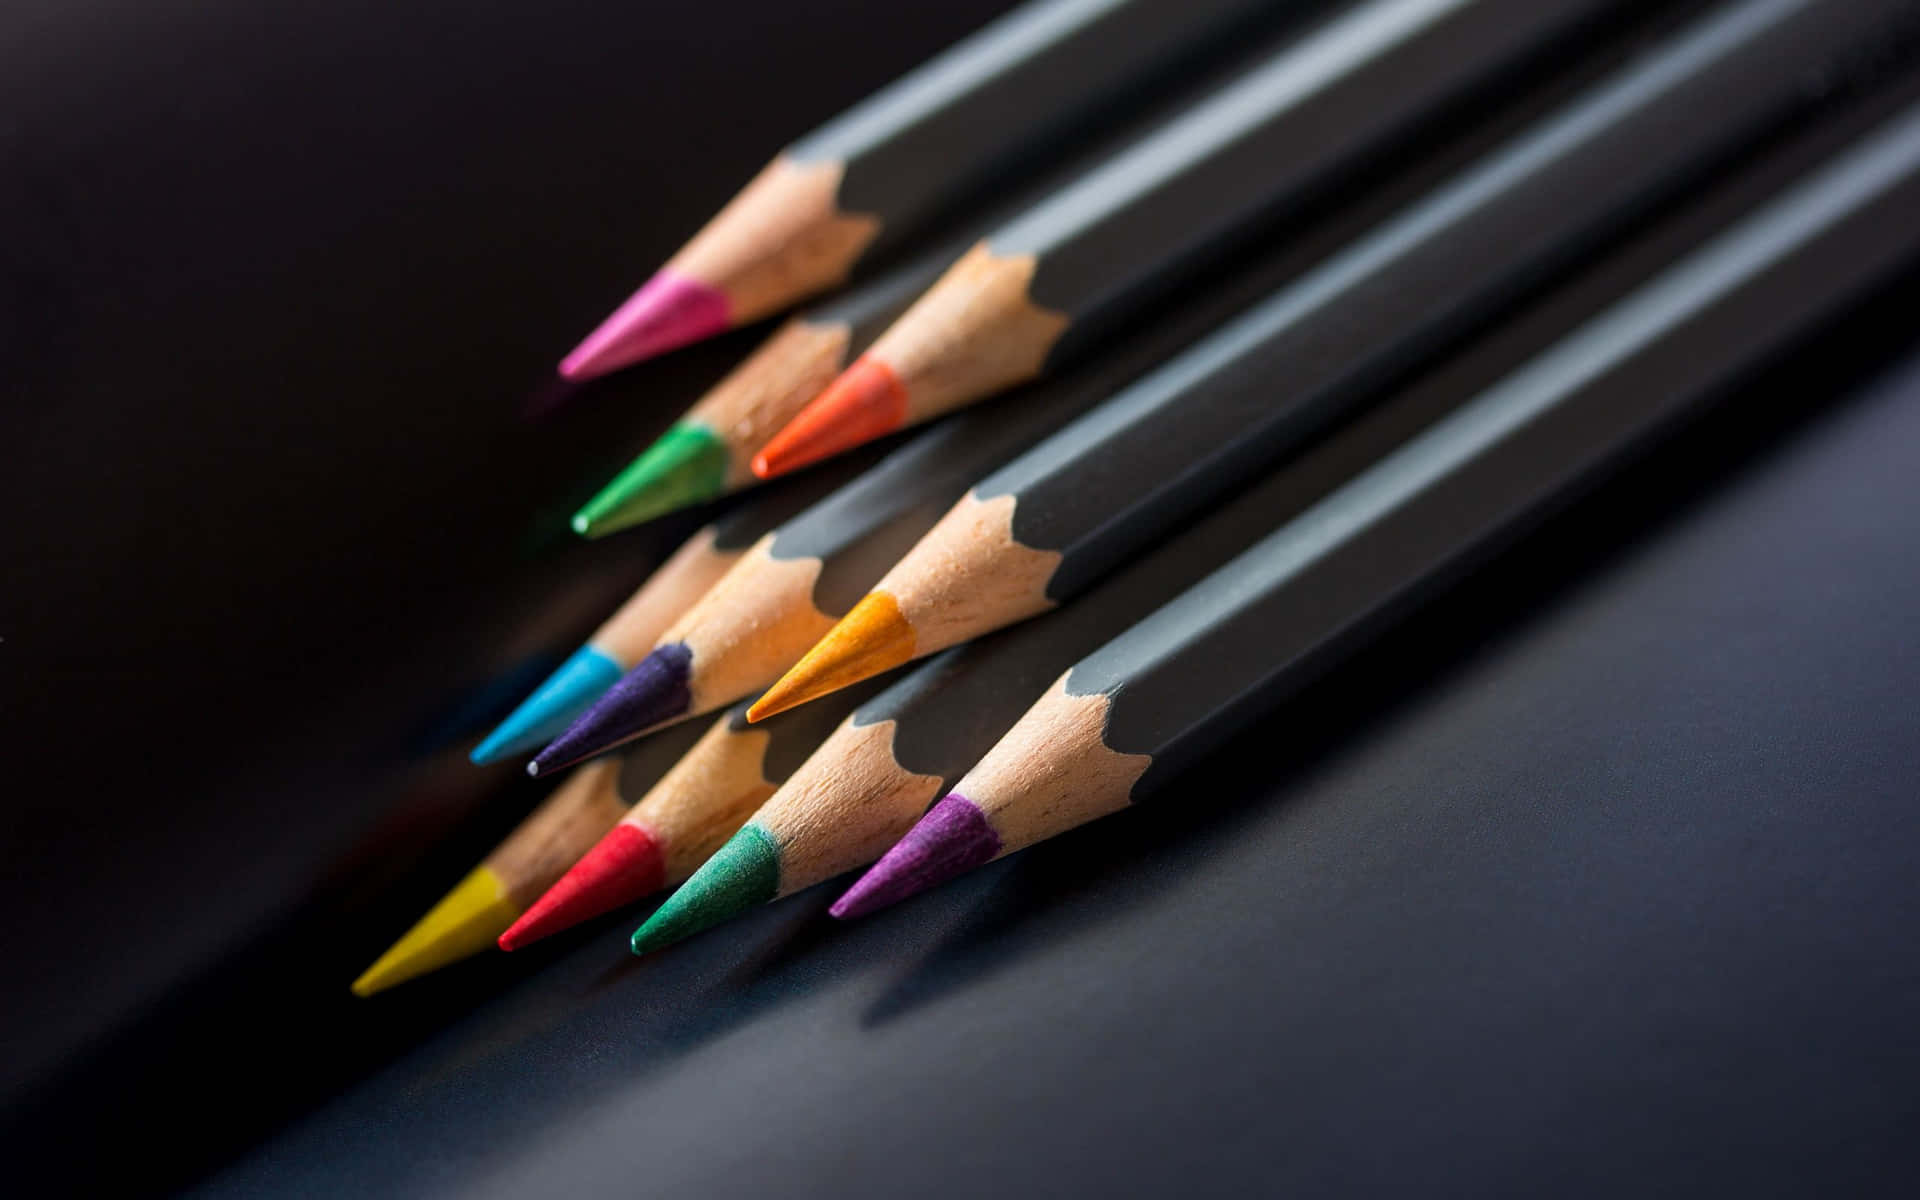 A simple, wooden pencil amongst a colorful background.